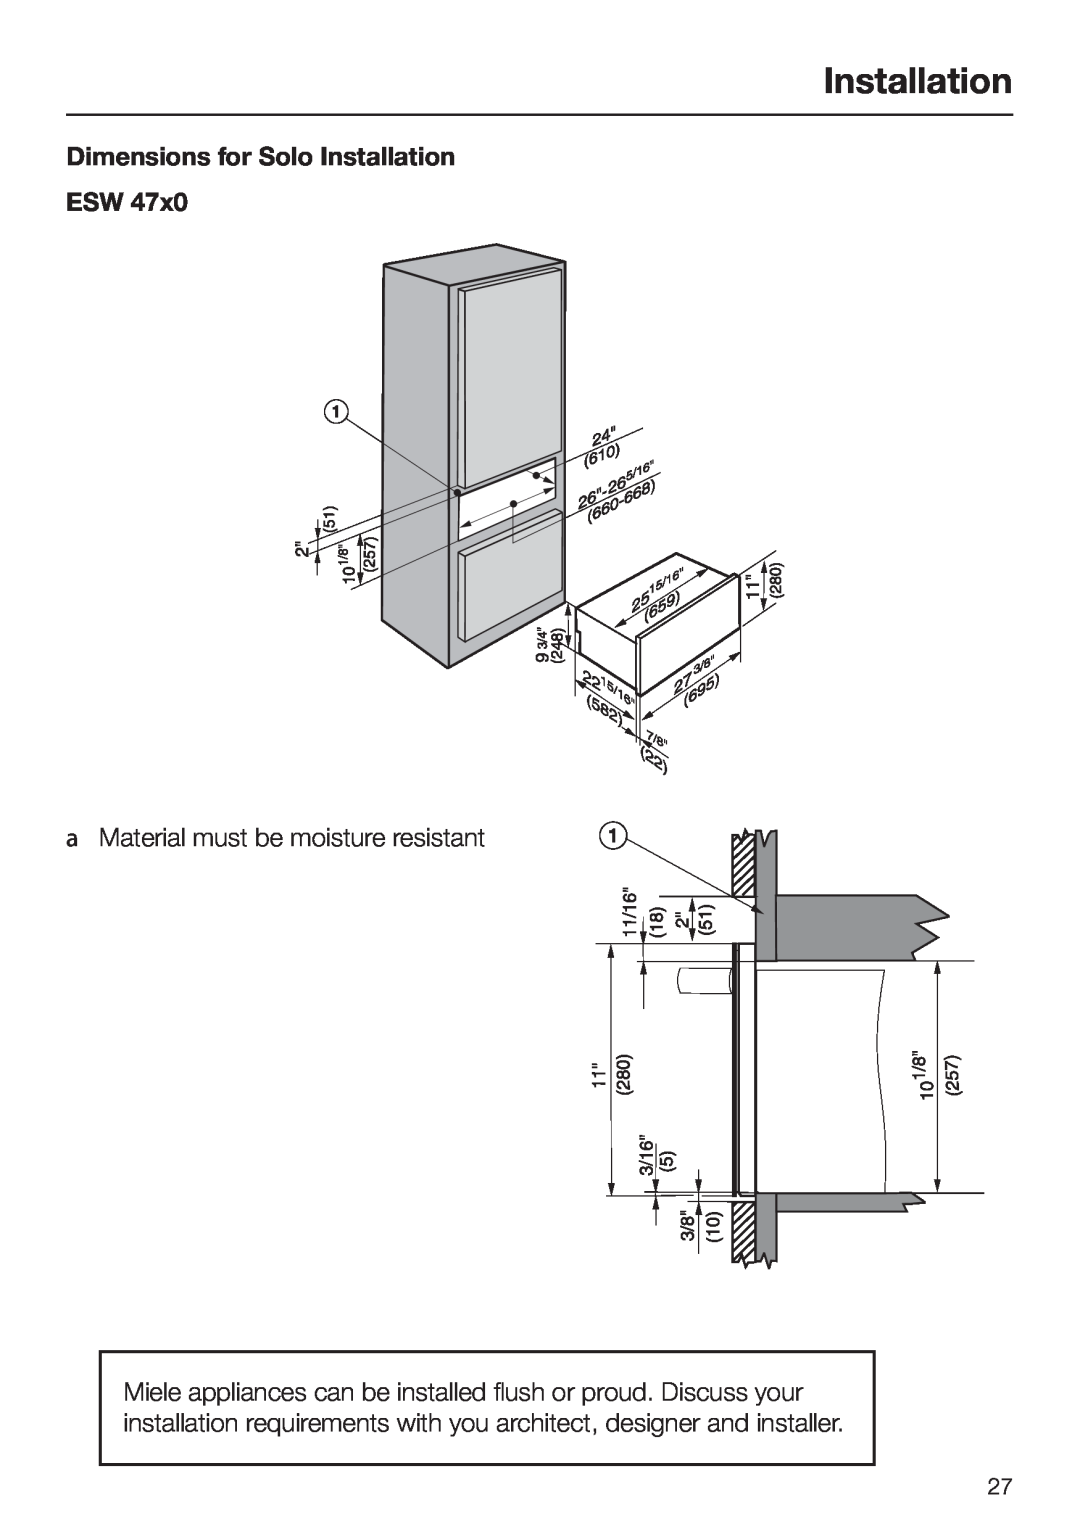 Miele ESW 47XX, ESW 48XX EN_CA Dimensions for Solo Installation ESW, a Material must be moisture resistant 